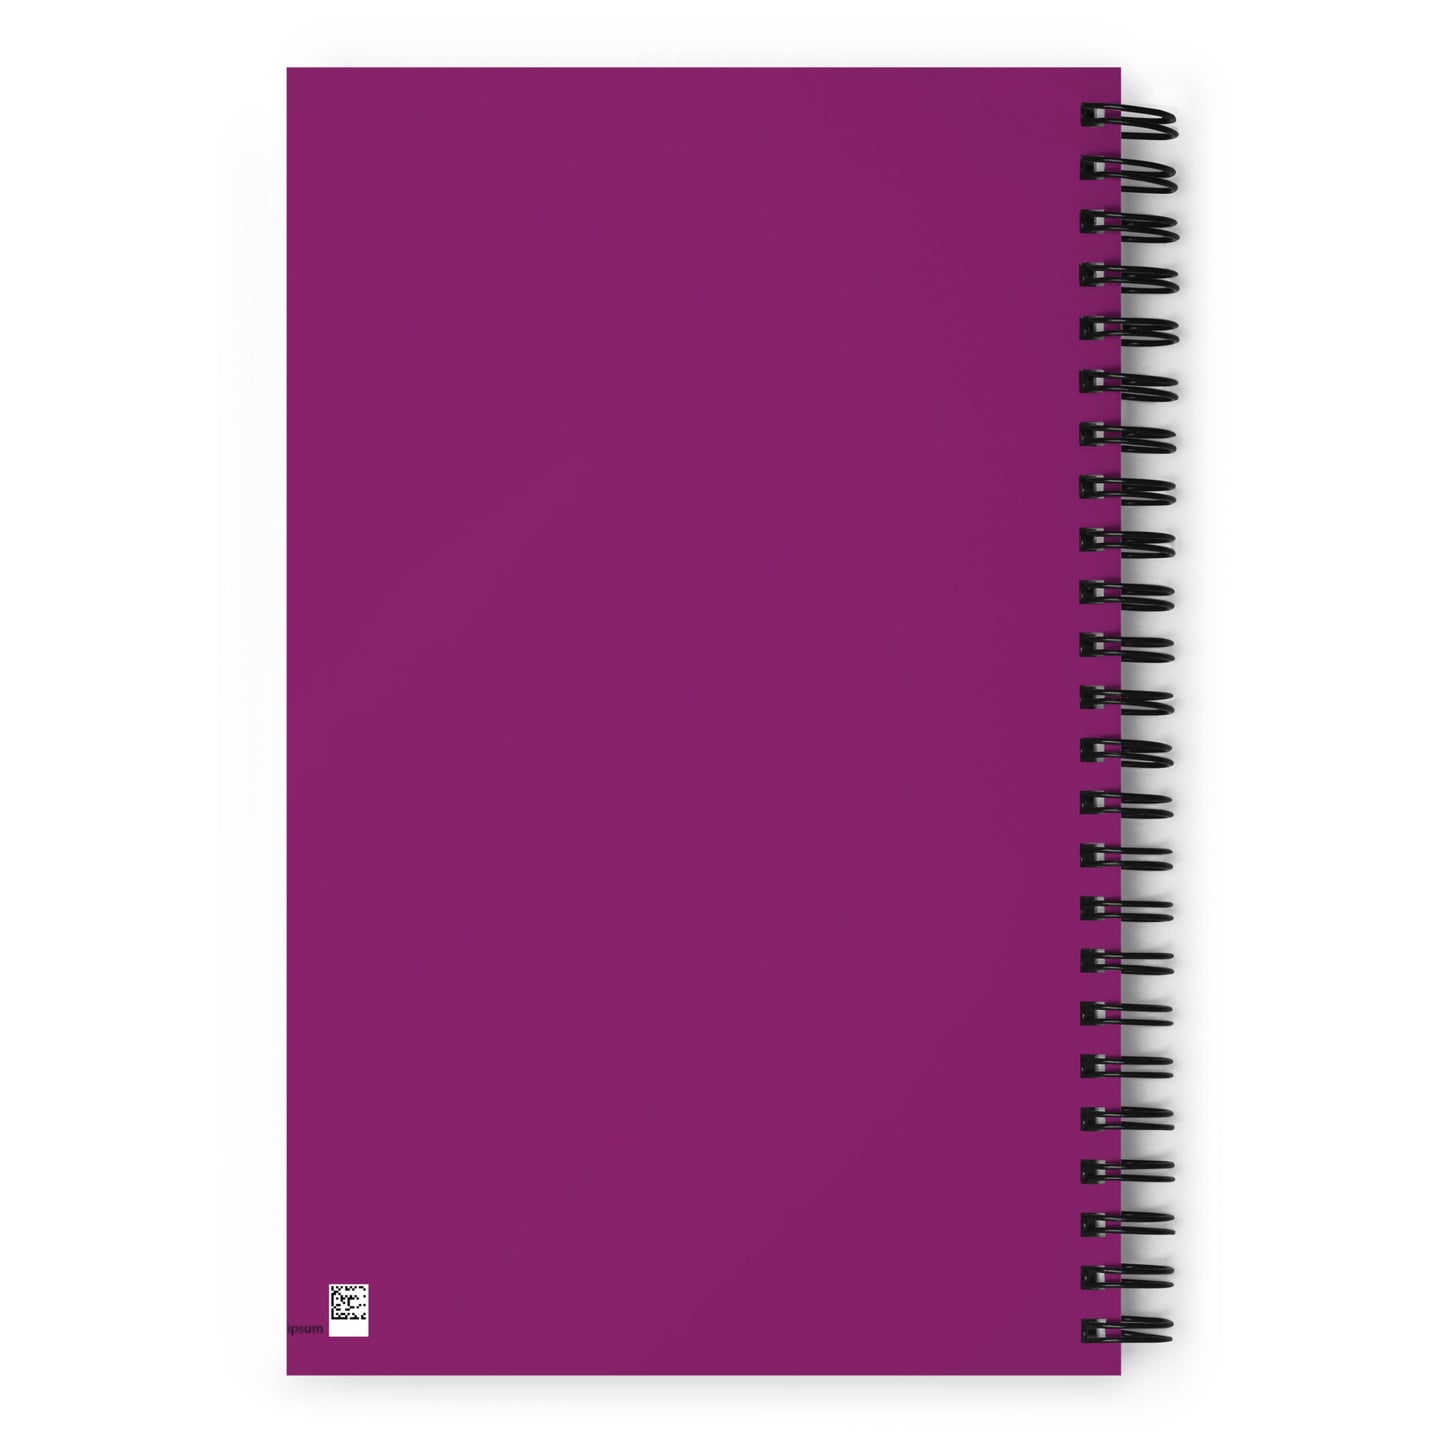 The Love of Work Spiral notebook